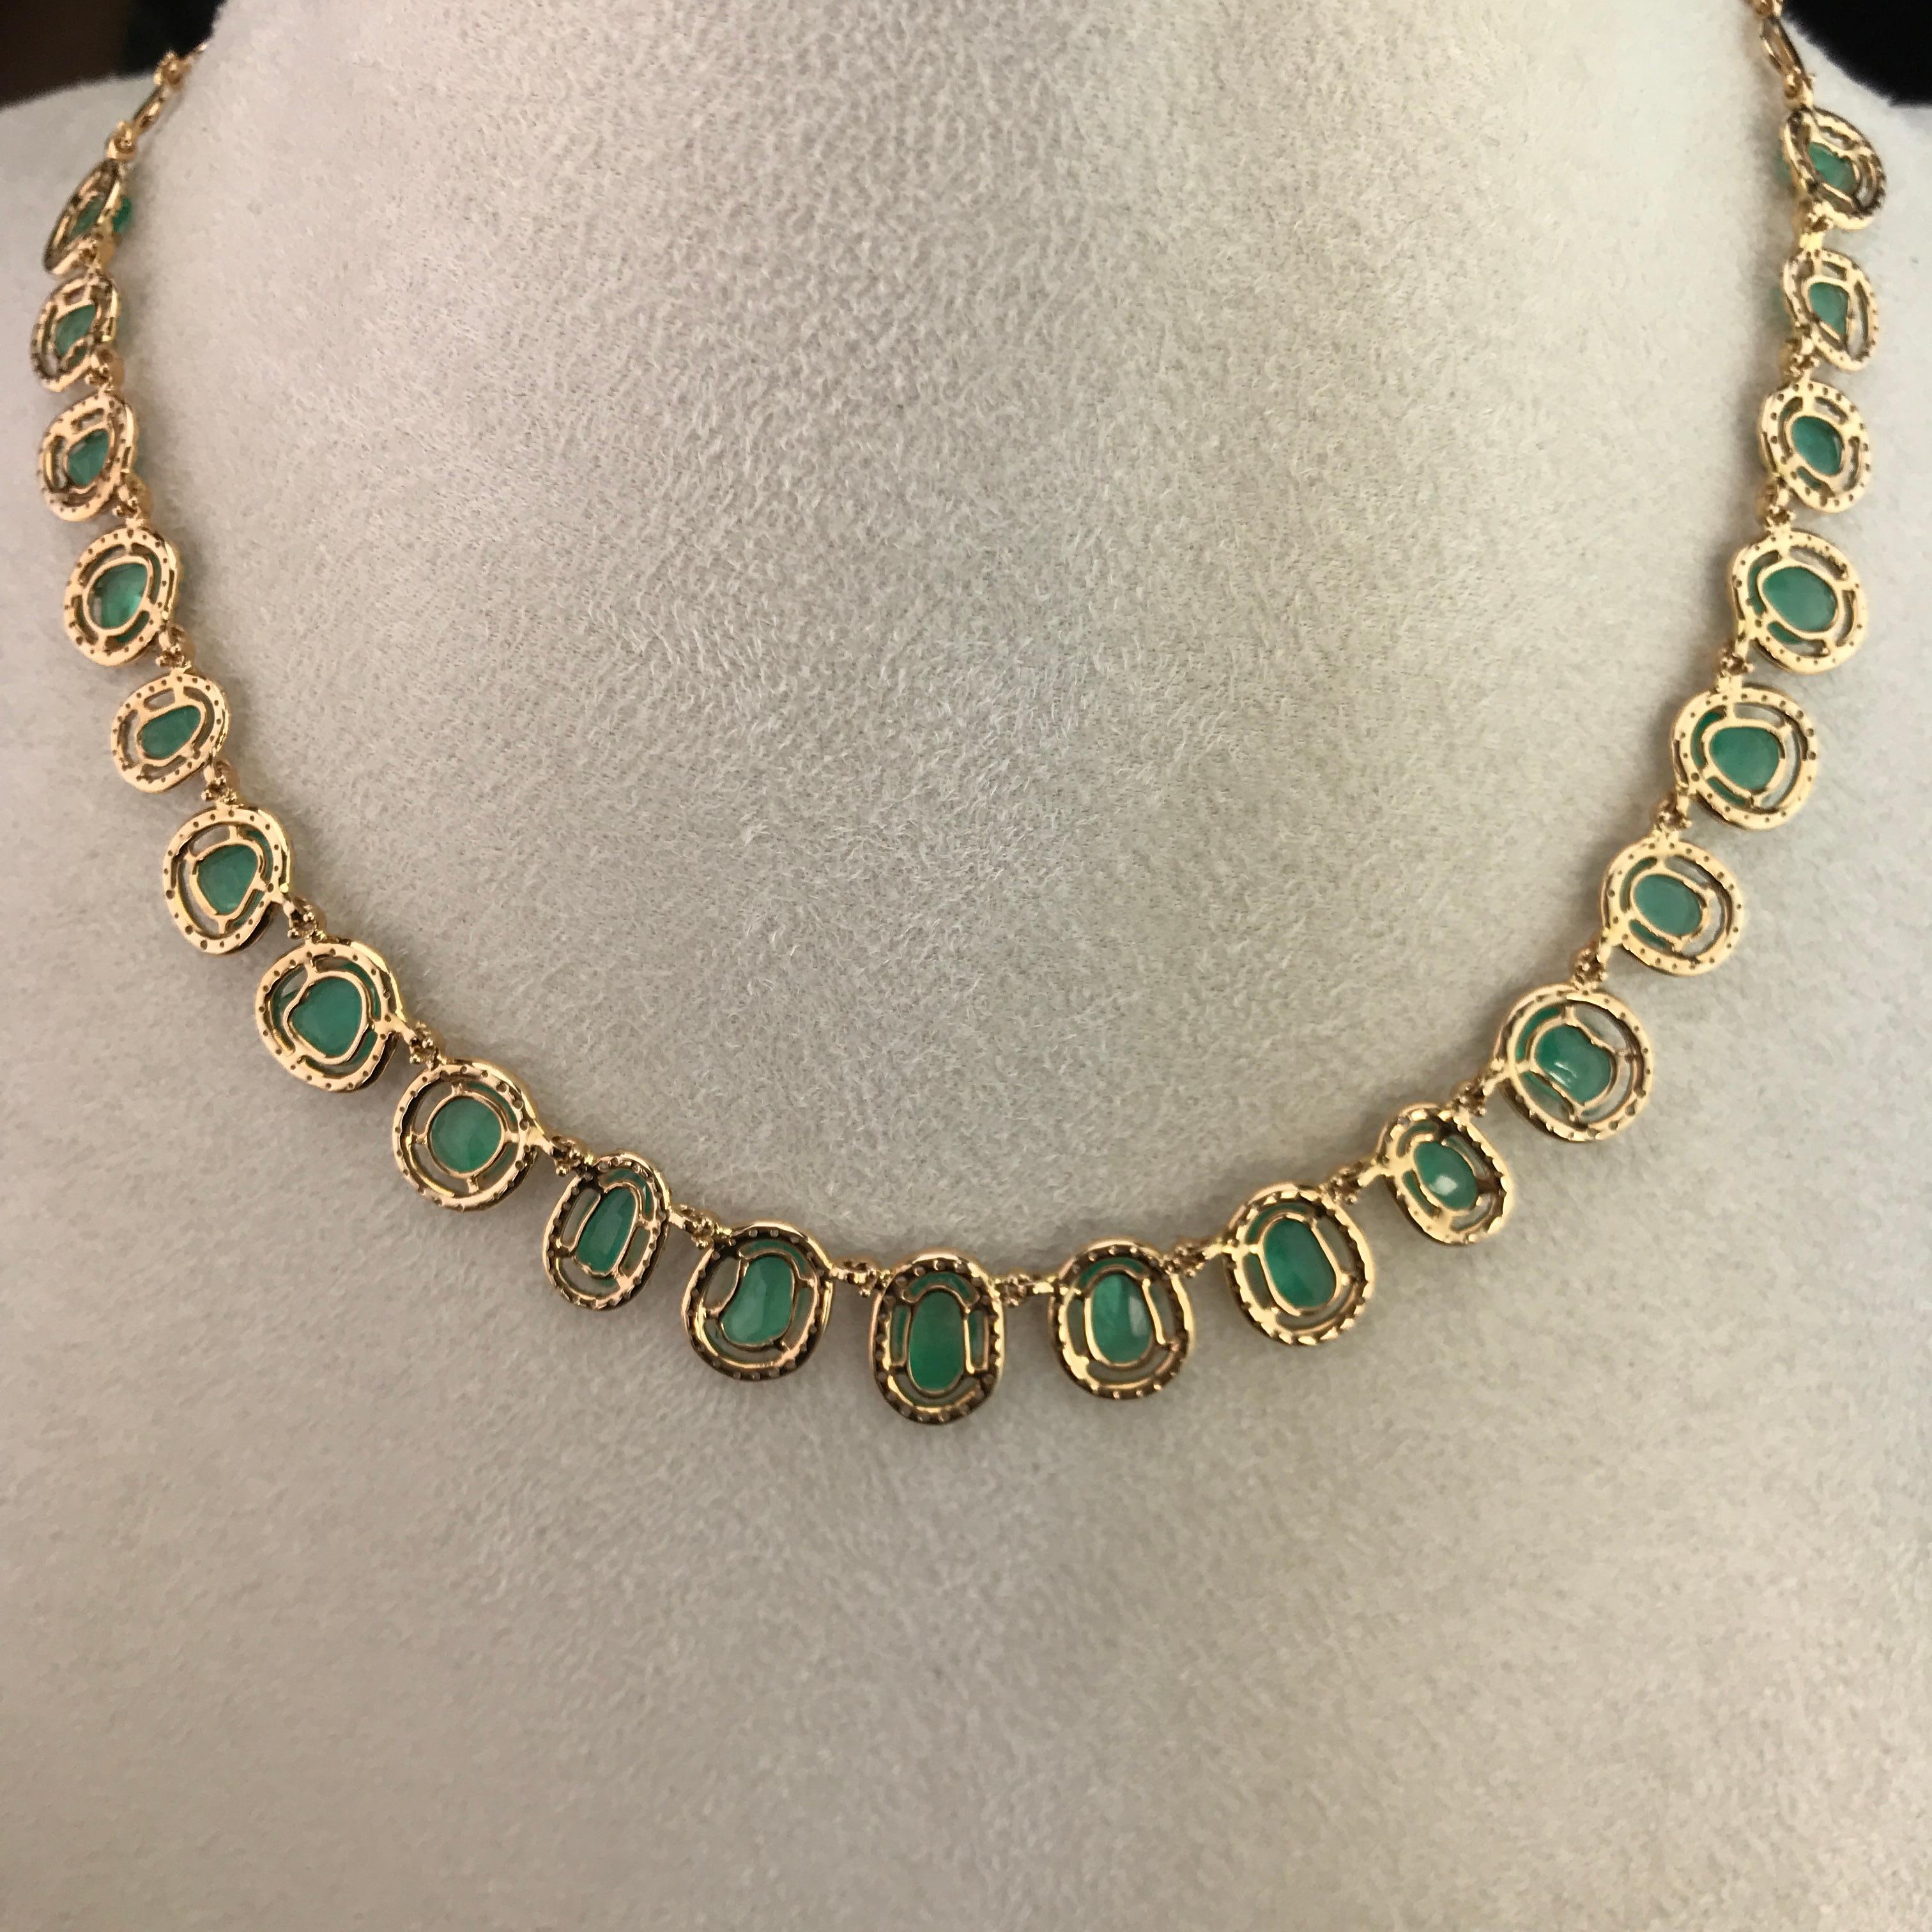 A very modern and chic 10.52 carats rose-cut Zambian Emerald and 2.82 carat White Diamond necklace, all set in 18.15 grams of 18K Yellow Gold. The length is adjustable and matching ring / earring / bracelet can be made to order.
